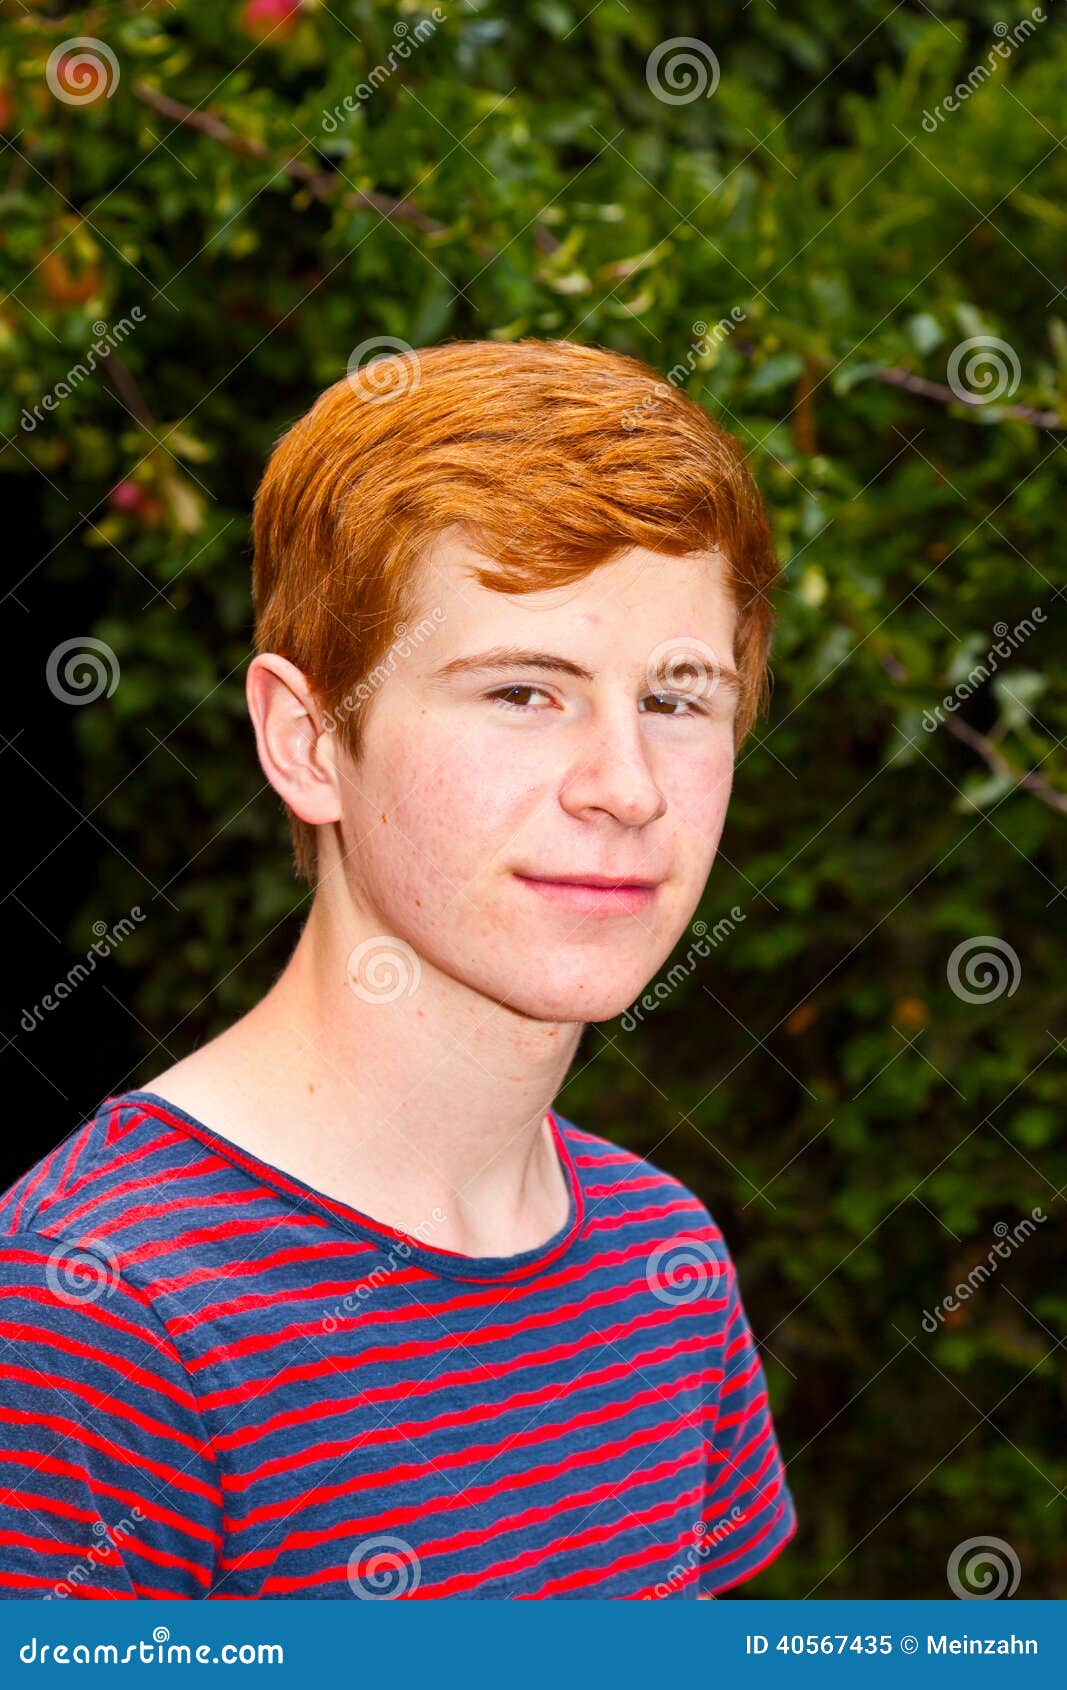 One of many men we see with red hair | Photo